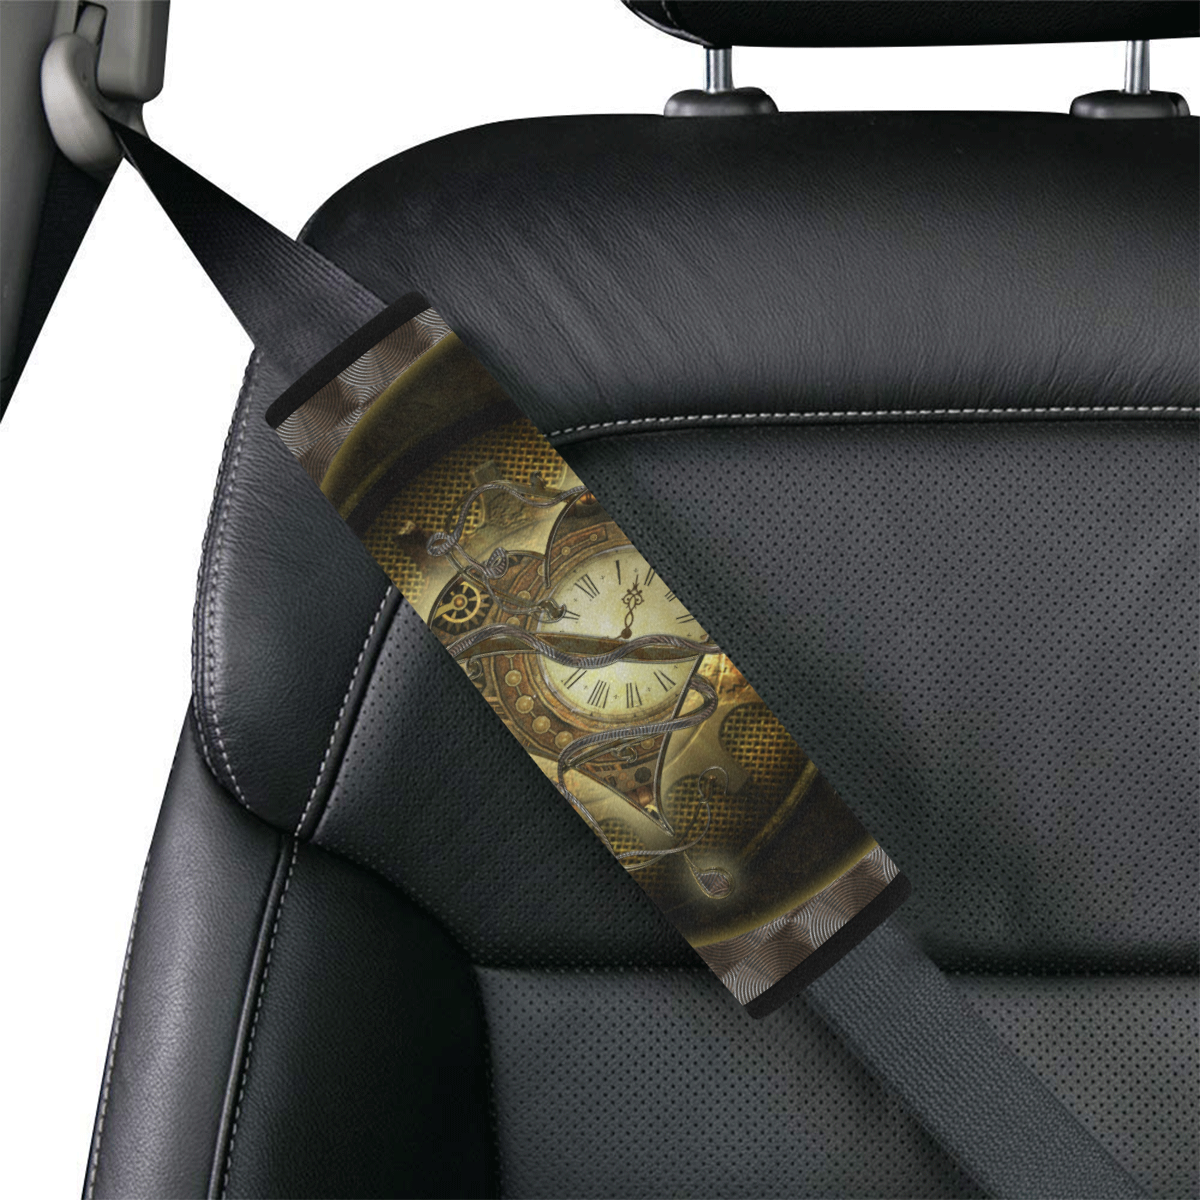 Awesome steampunk heart Car Seat Belt Cover 7''x10''